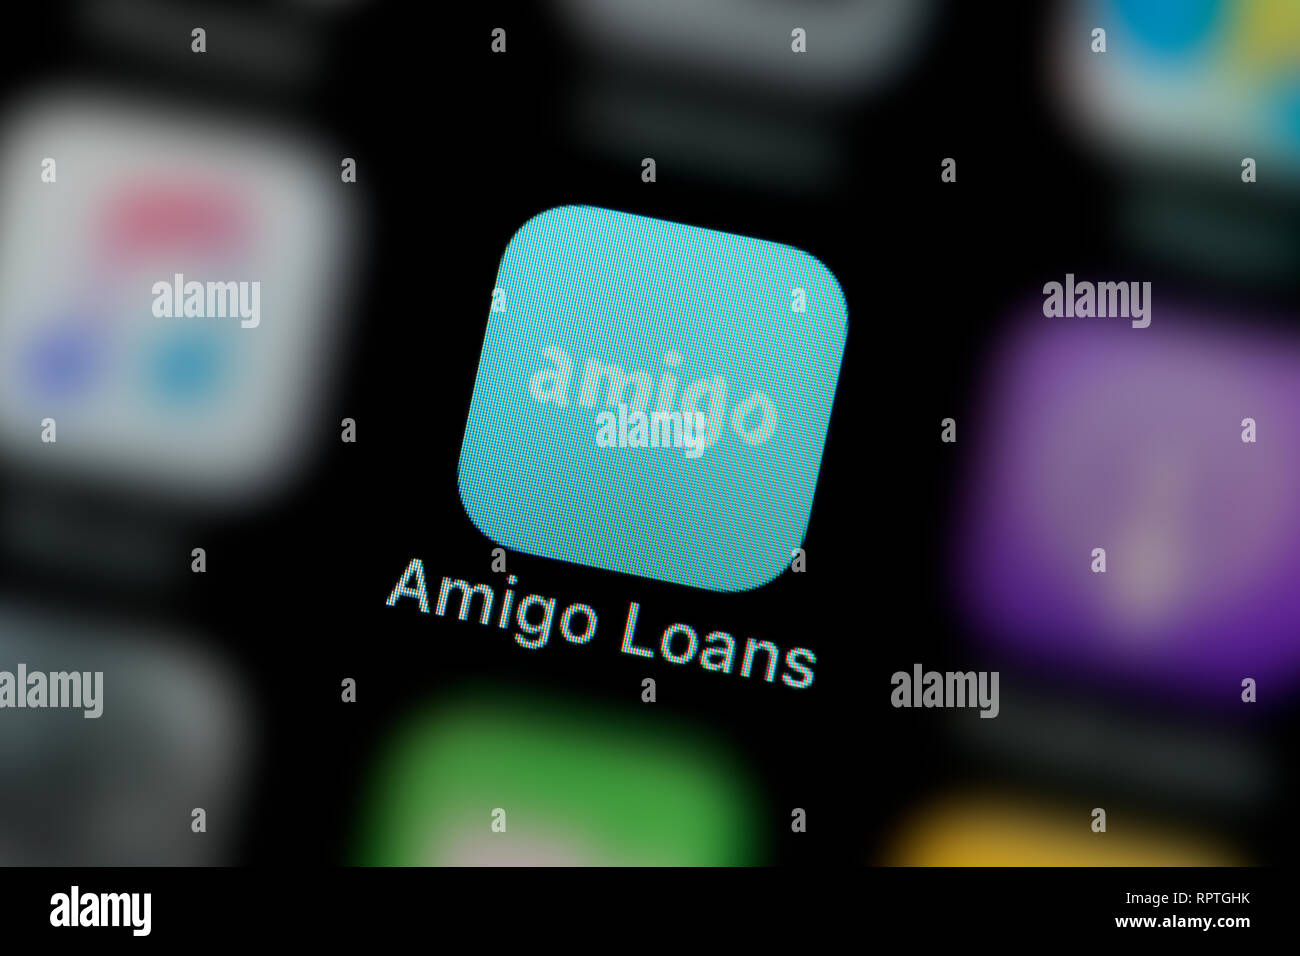 A close-up shot of the Amigo Loans app icon, as seen on the screen of a smart phone (Editorial use only) Stock Photo